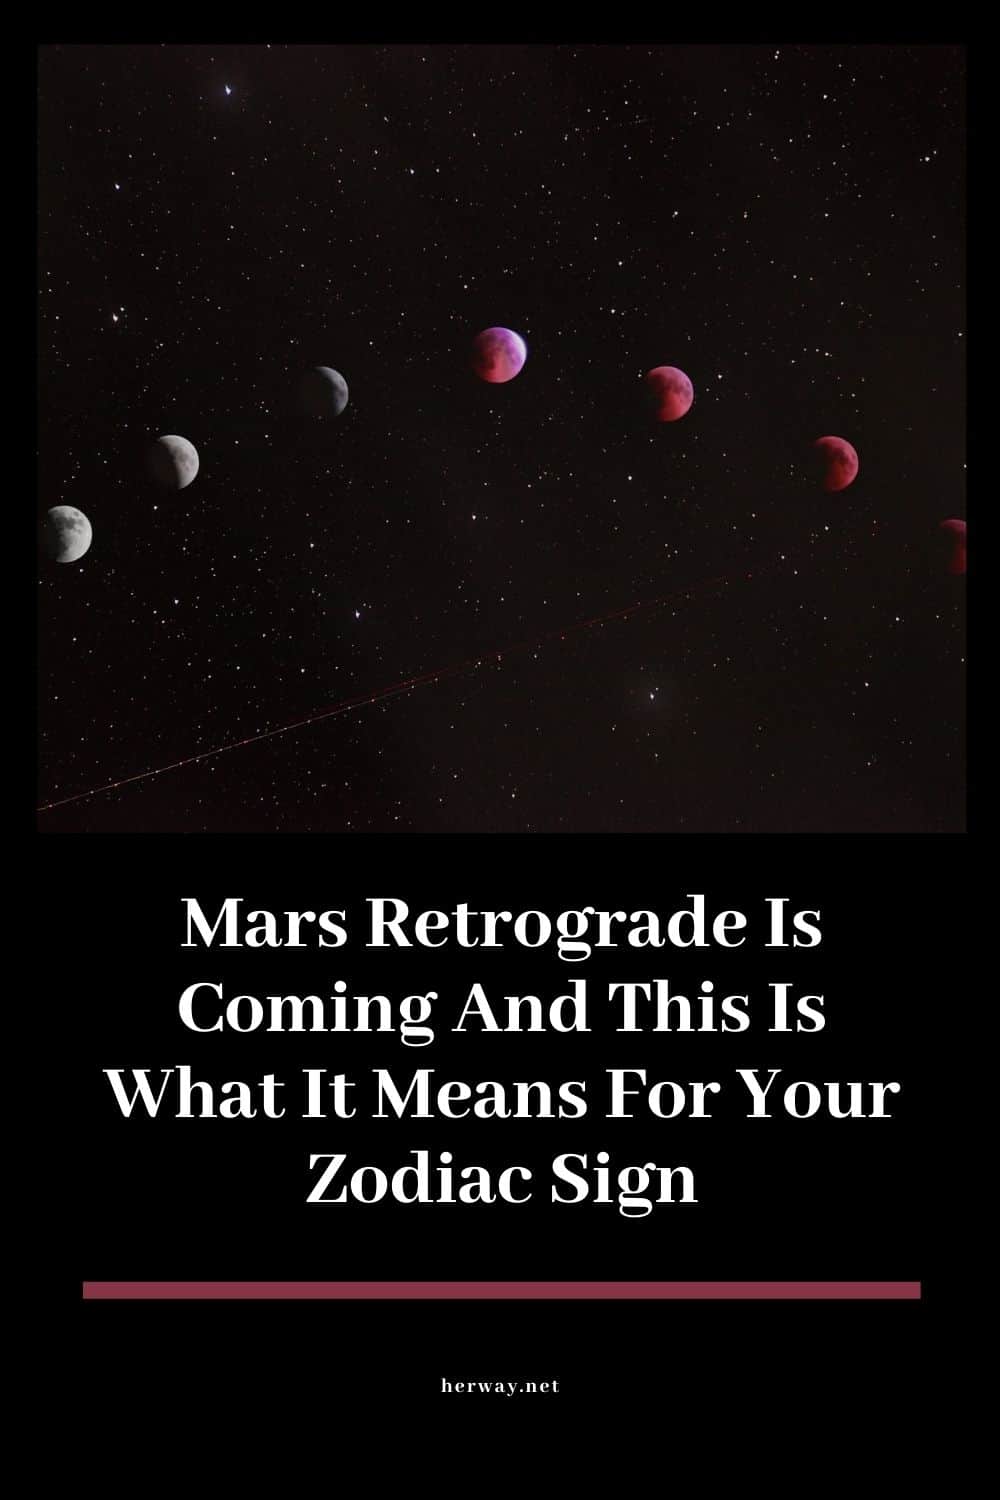 Mars Retrograde Is Coming And This Is What It Means For Your Zodiac Sign